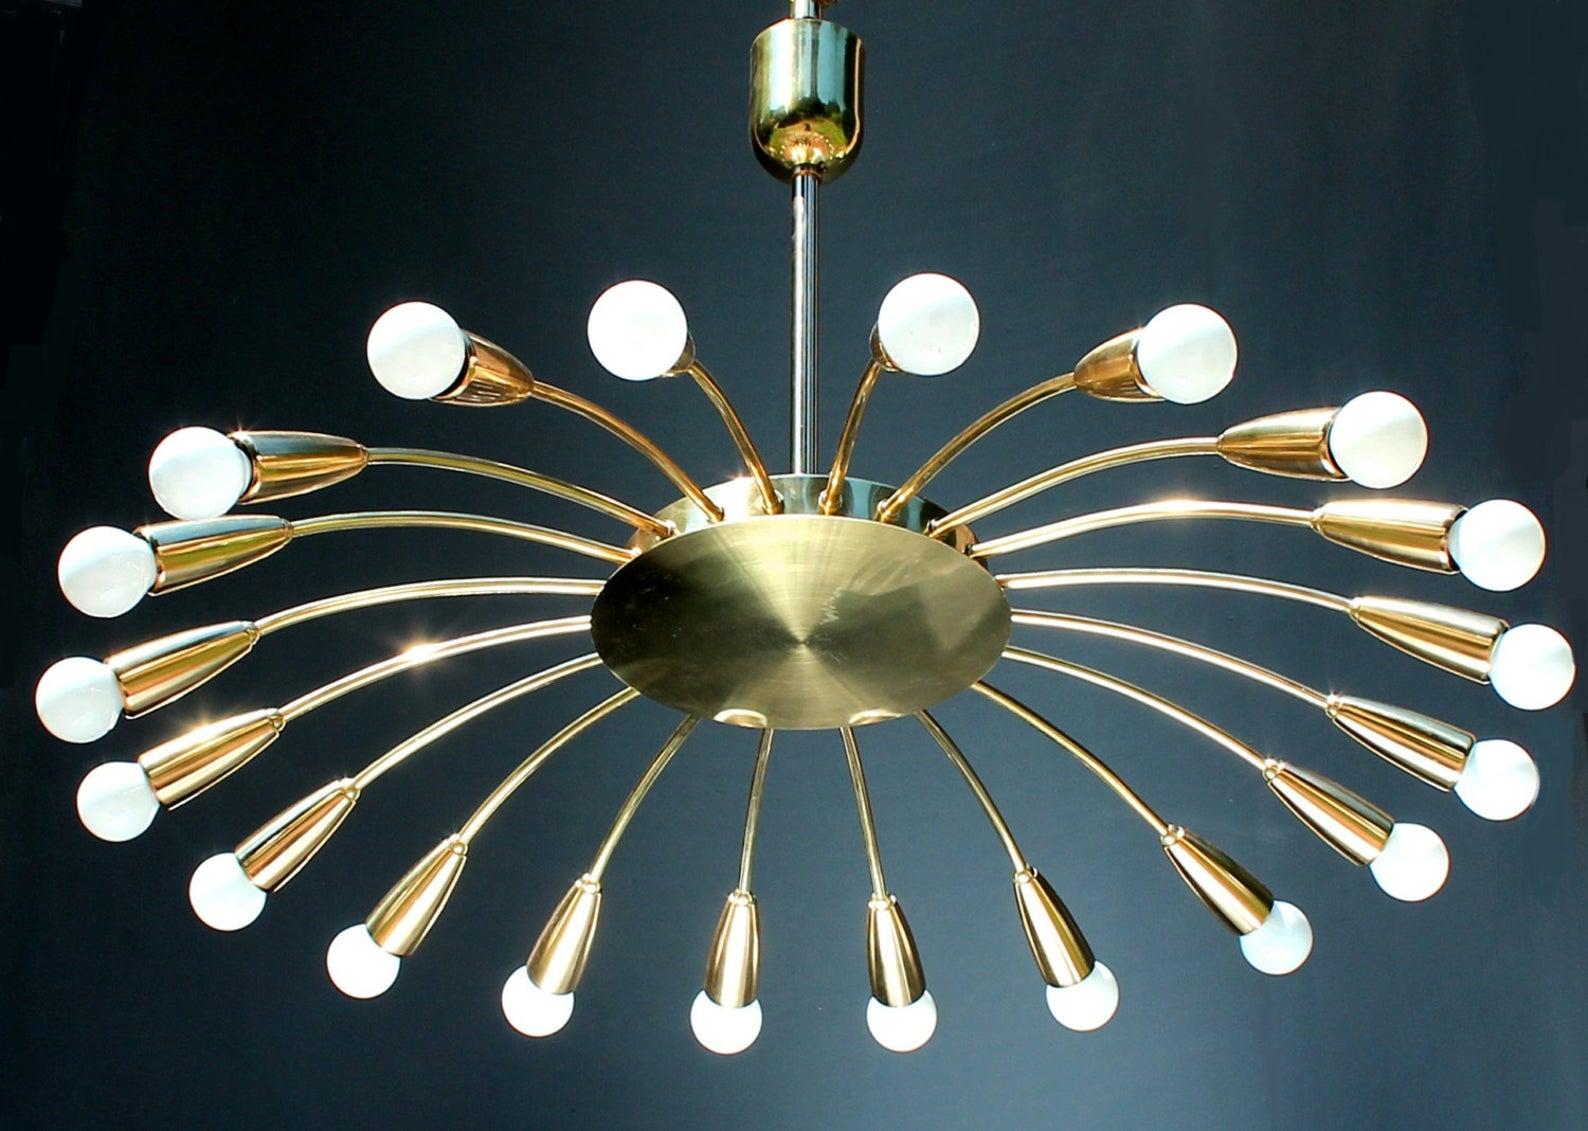 1 of 2 fine 1950s ballroom chandeliers with 20-light. Brass, rewired

The chandelier is in excellent original condition, carefully cleaned and rewired. The brass surfaces are lightly patinated. Photo 3 shows a nearly invisible crack at the lamp body